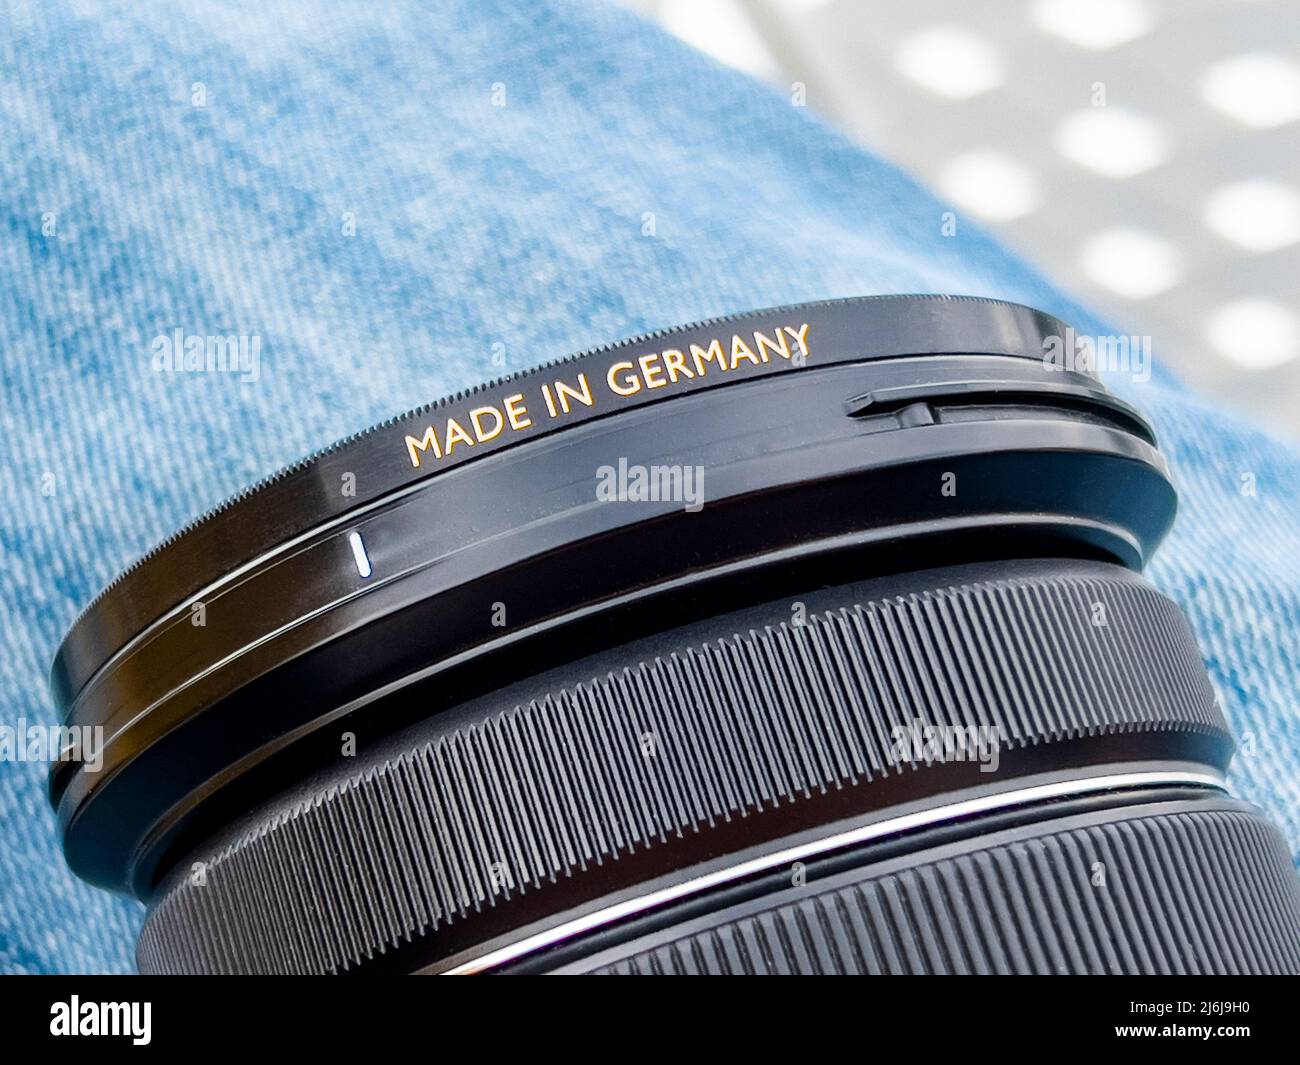 MADE IN GERMANY text on camera lens. German industrial goods with advanced mechanical professional design and know how boosting economy, finance Stock Photo